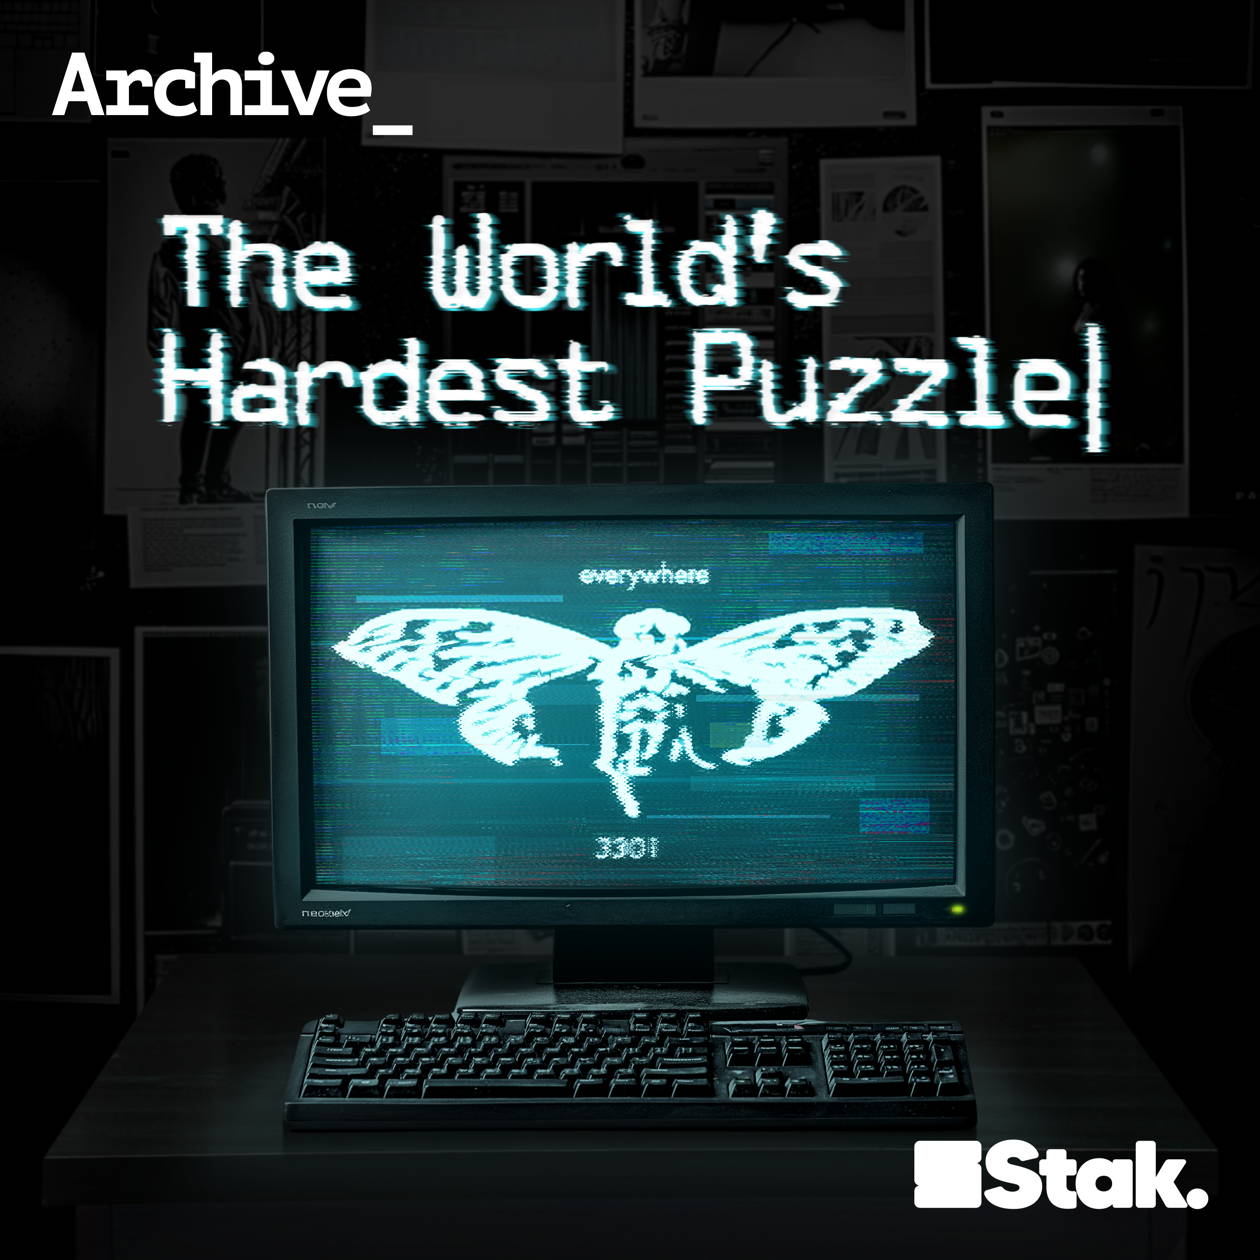 Artwork for the Archive: The World's Hardest Puzzle podcast.